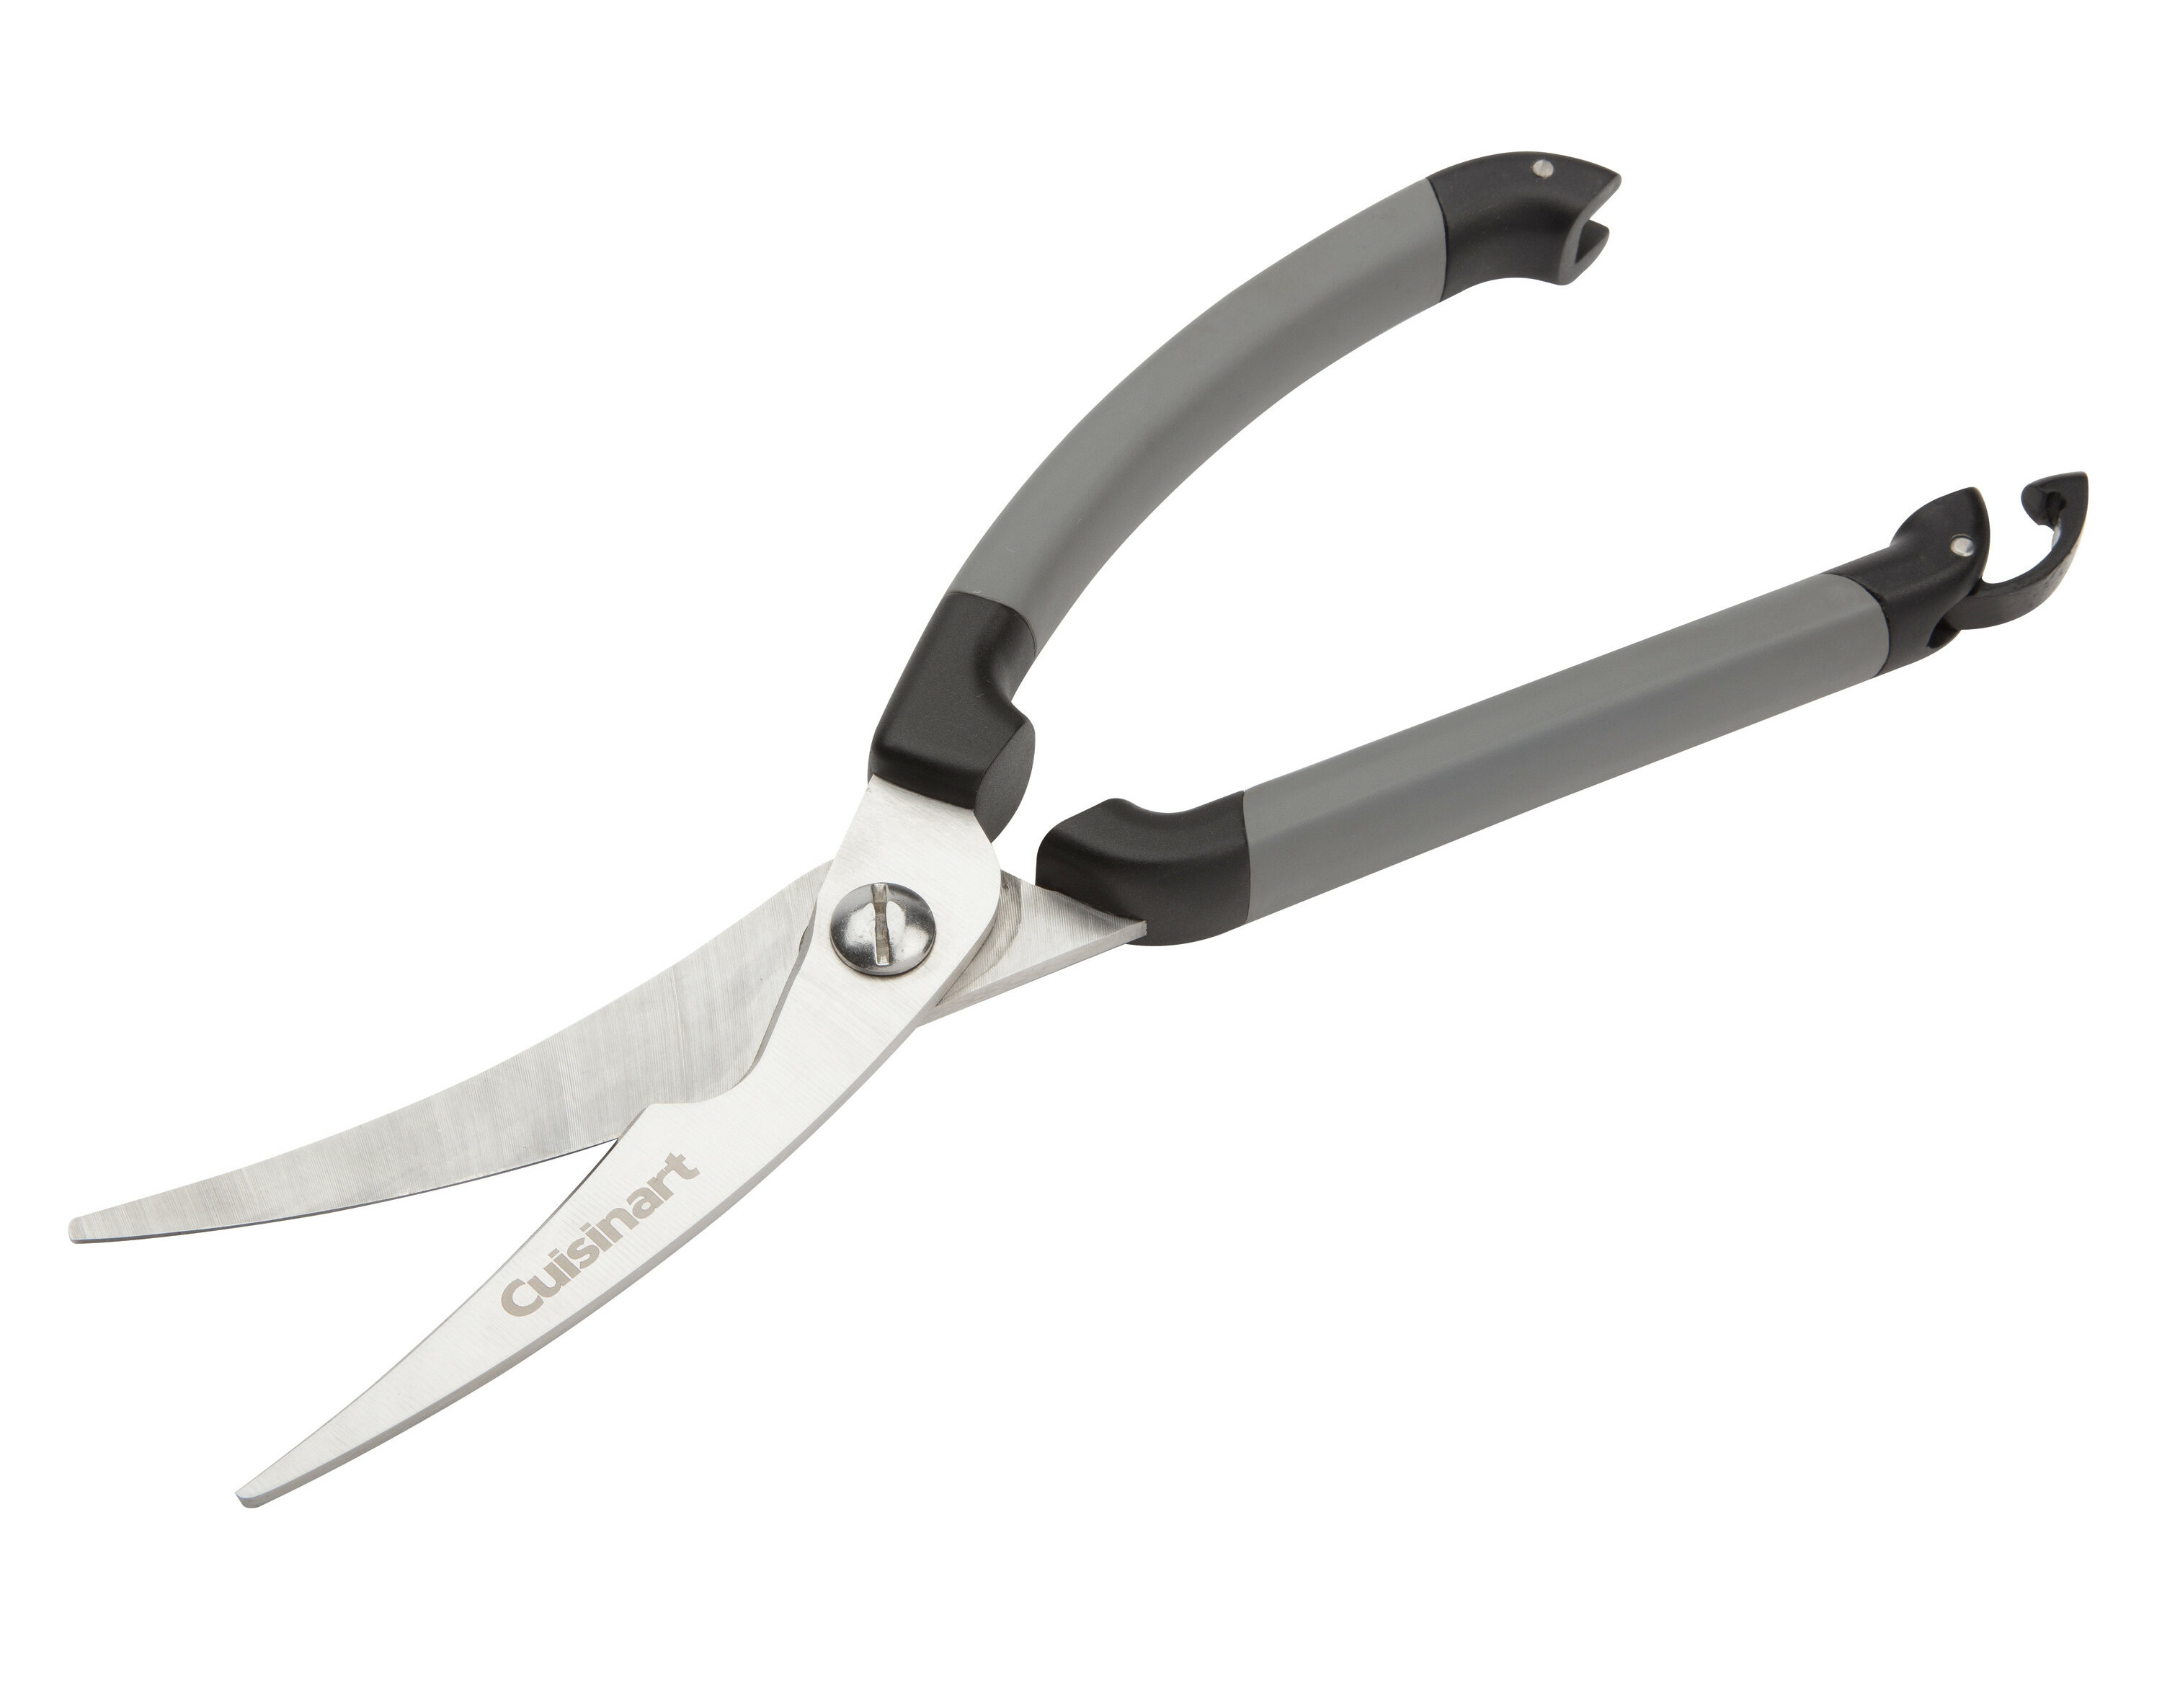 kitchen shears definition and uses